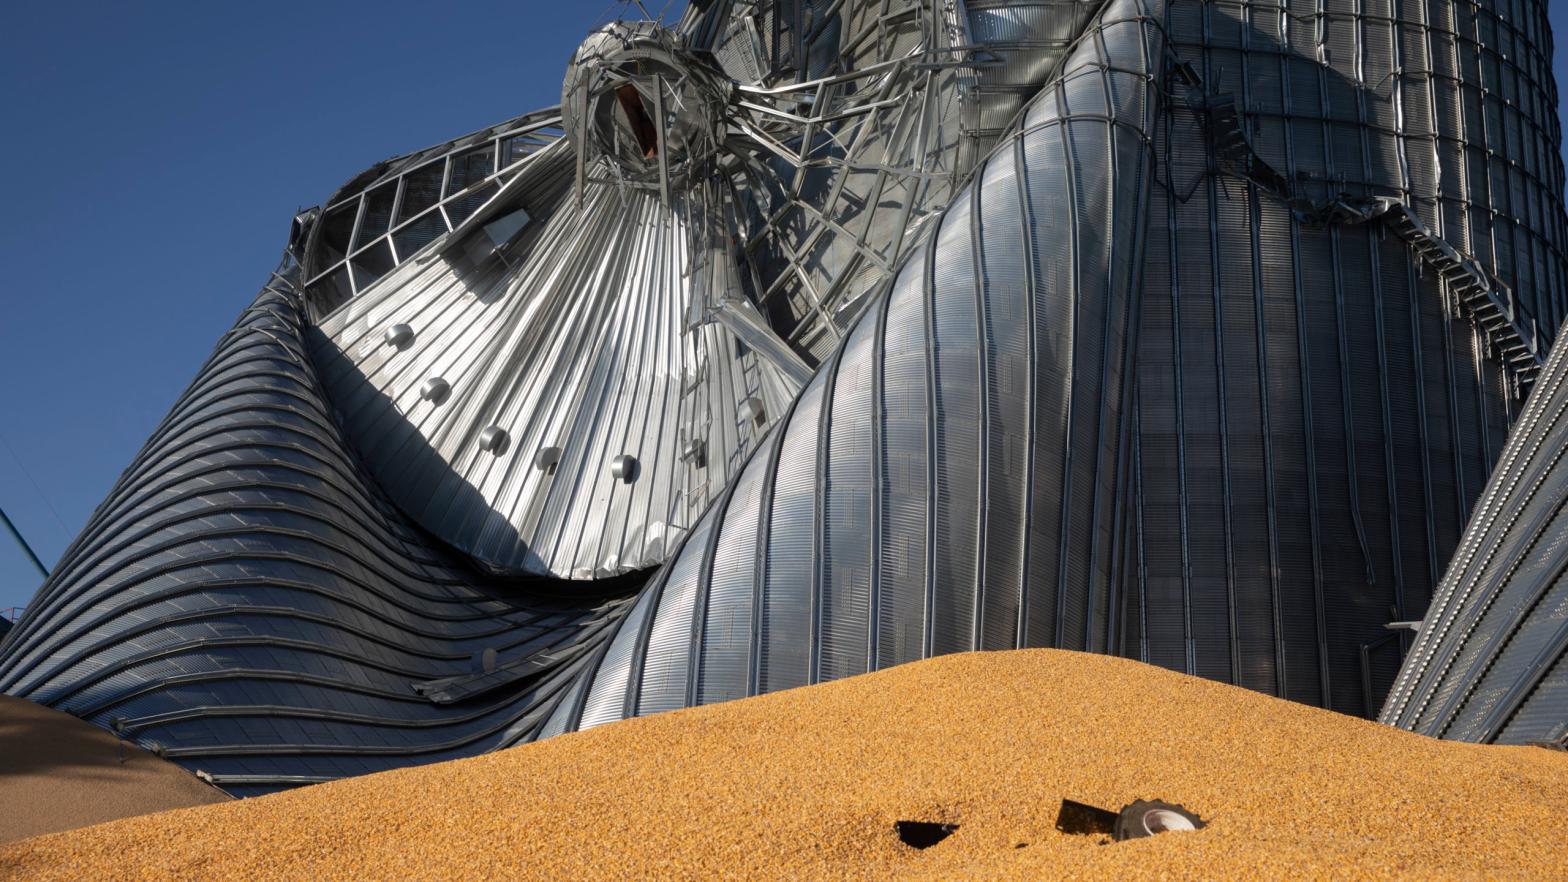 Corn sits near damaged grain bins at the Heartland Co-Op grain elevator on August 11, 2020 in Luther, Iowa. (Photo: Daniel Acker, Getty Images)